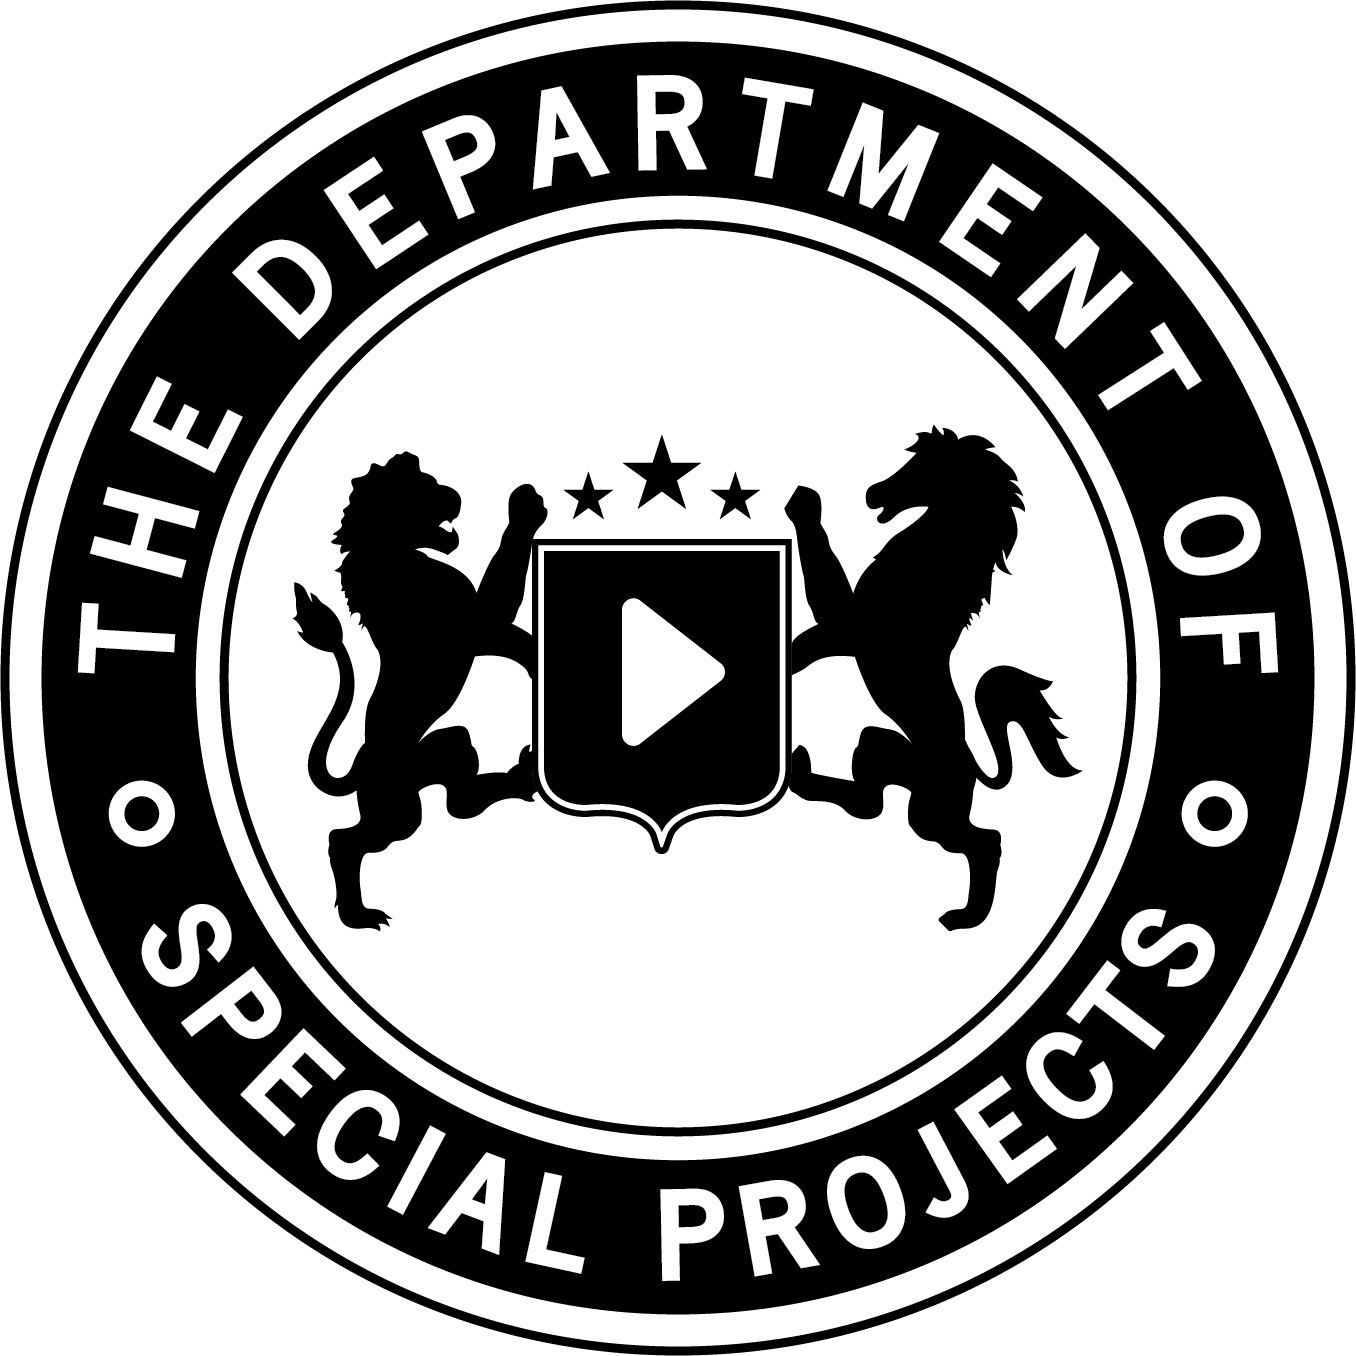 The Department of Special Projects - company